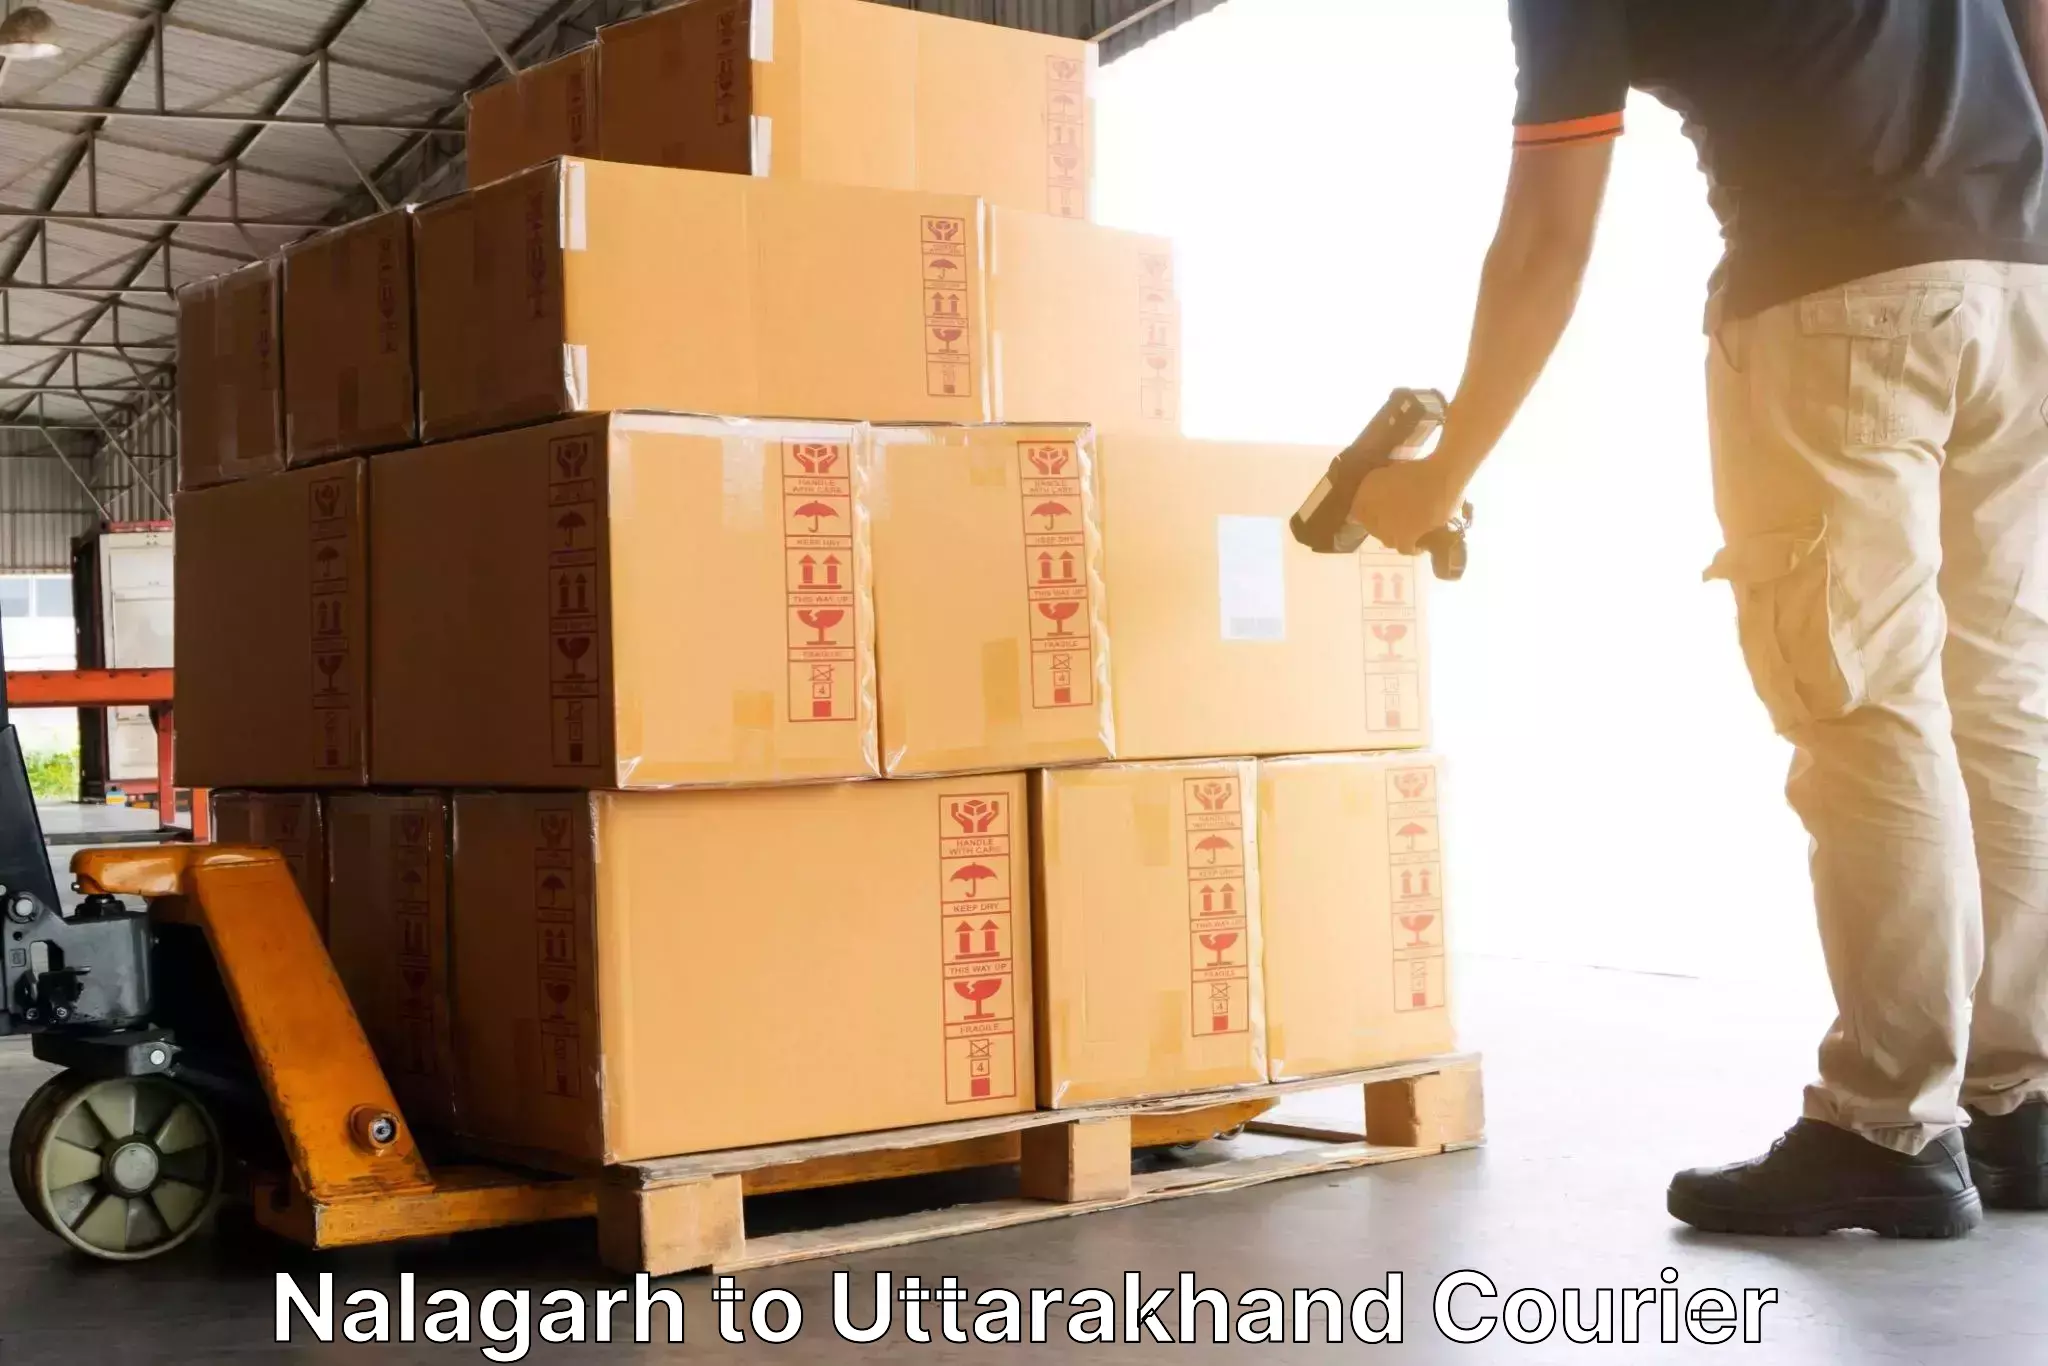 Express delivery solutions in Nalagarh to Baijnath Bageshwar